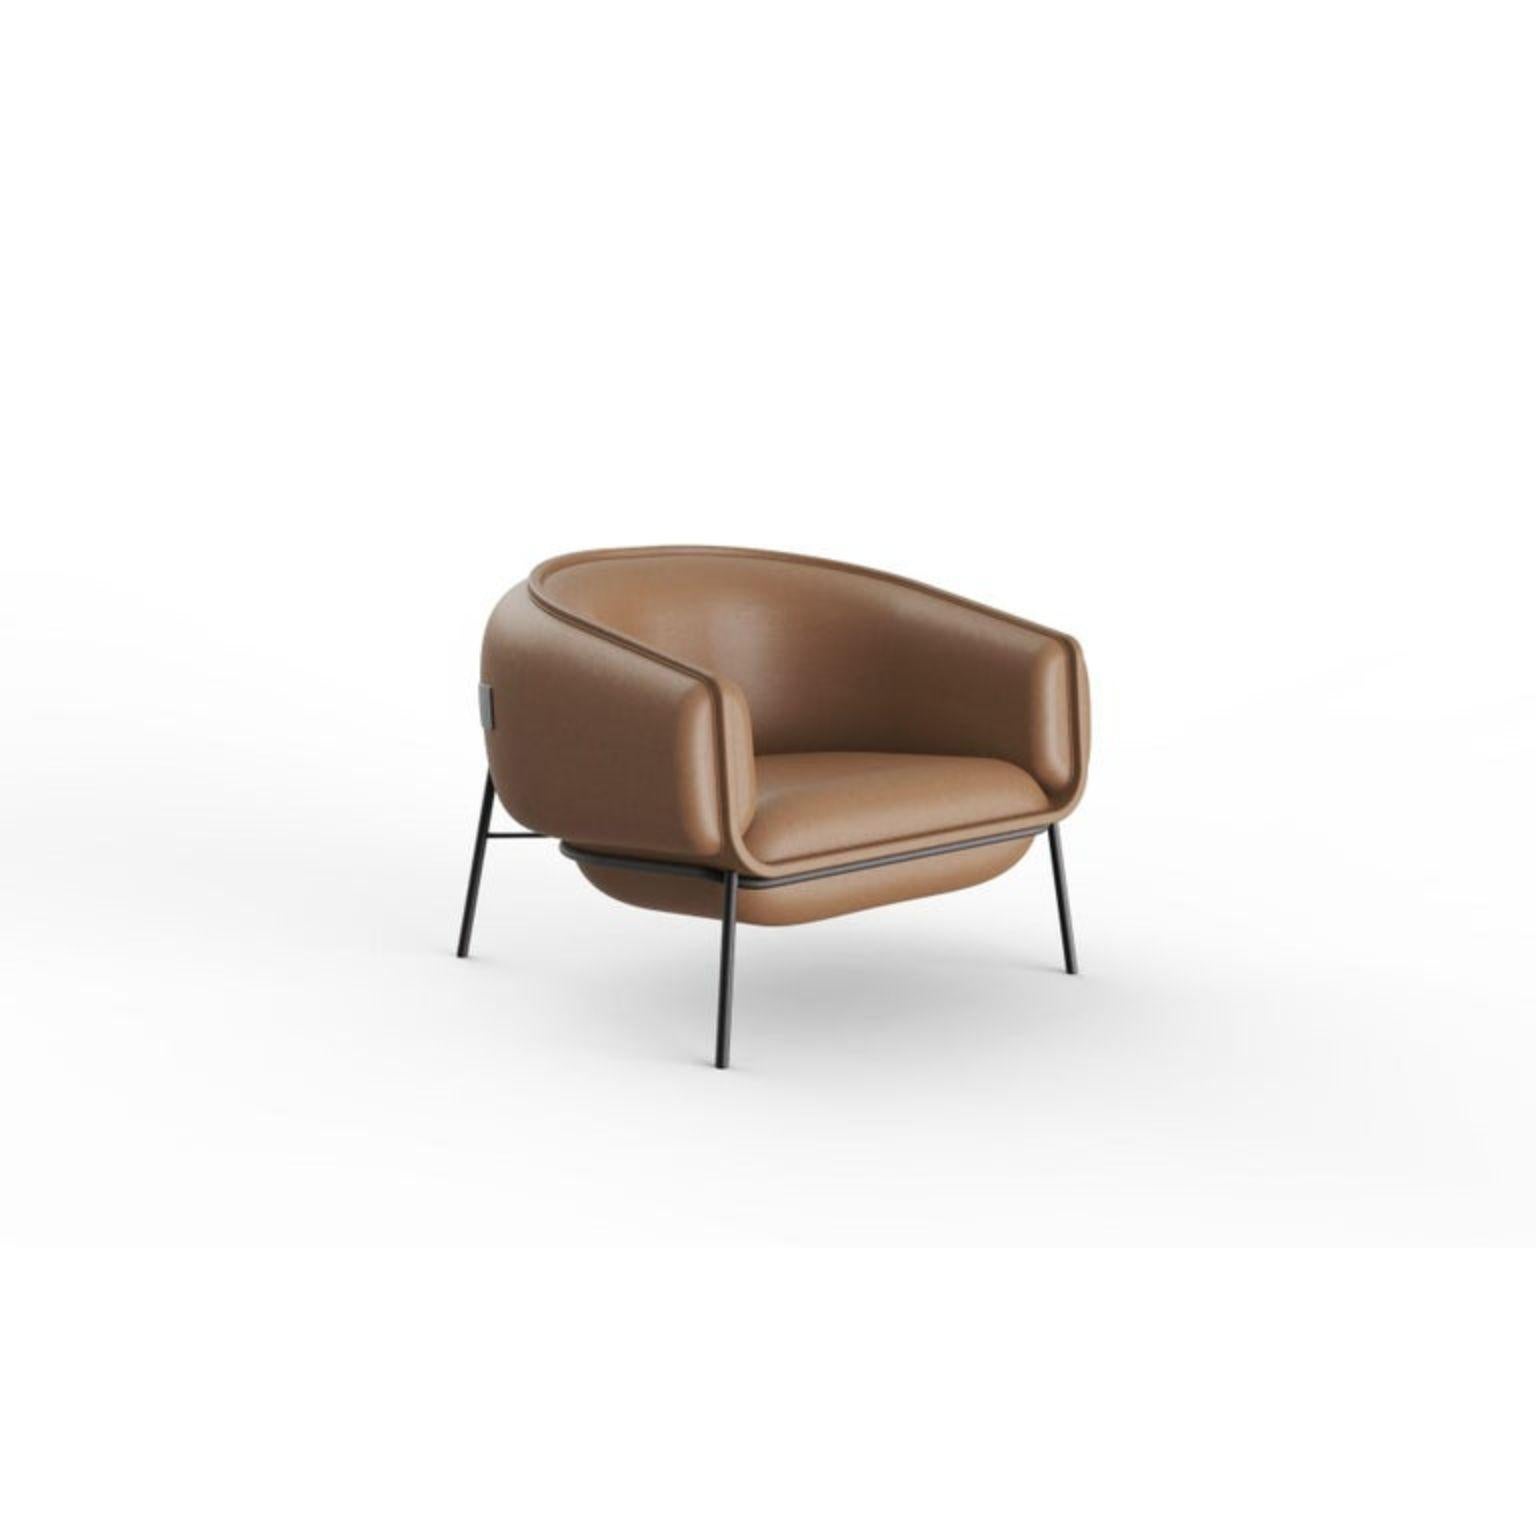 Contemporary Leather Blop Armchair 
Dimensions: D 78 x W 80 x H 75 cm
Seat height : 44 cm
Materials : top: fabric or leather
 feet: lacquer metal - choose from metal samples




